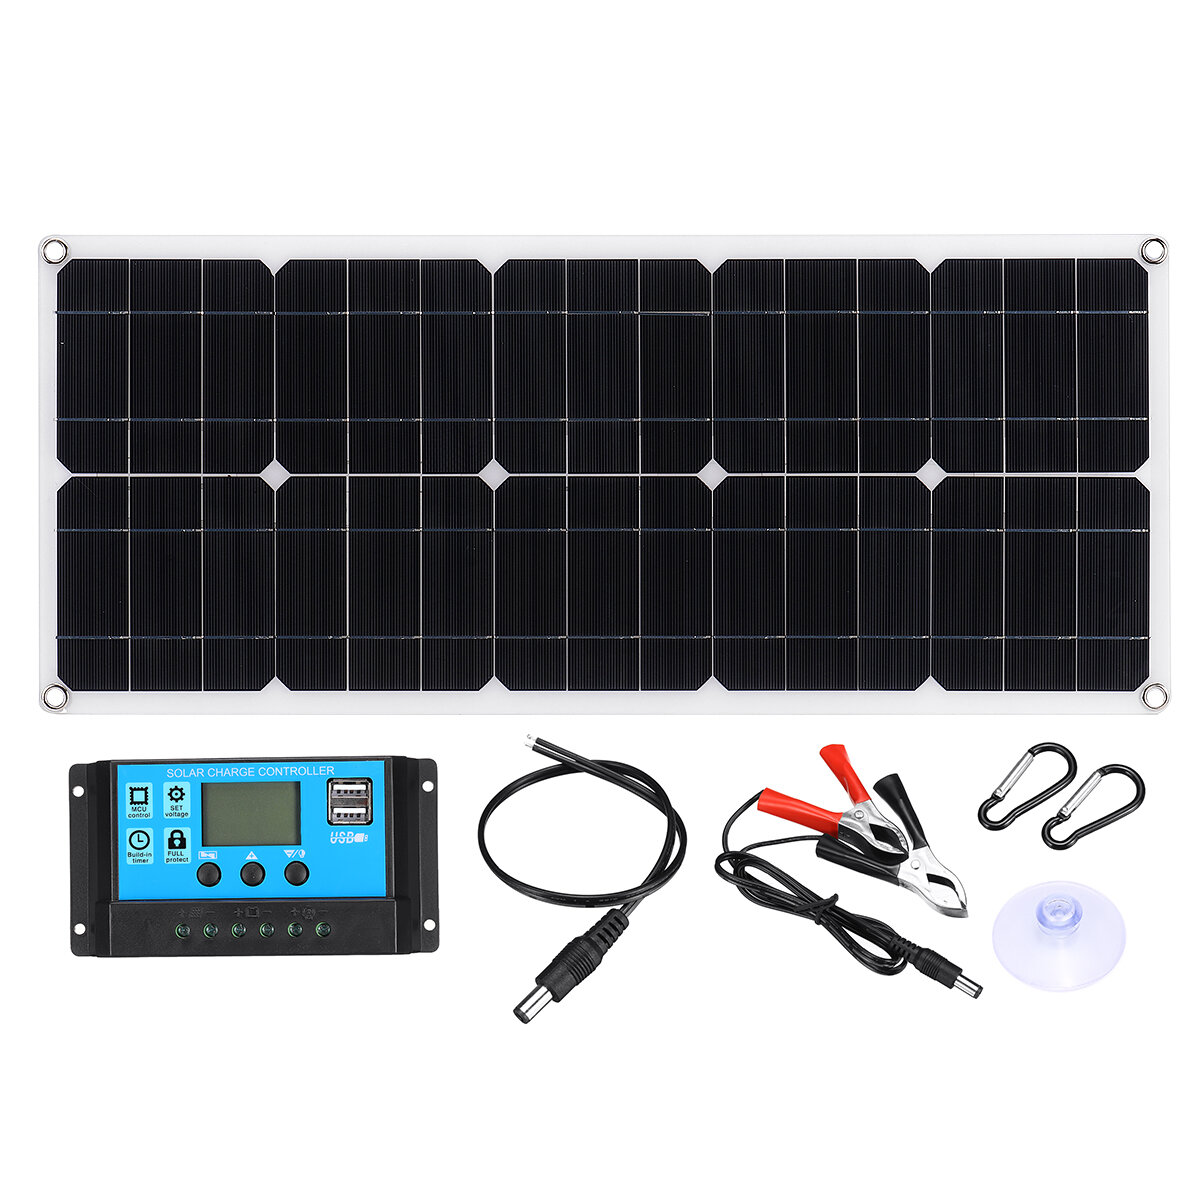 100W 18V Solar Panel Polycrystalline USB/DC Dual Output Battery Charger With 10A Controller Outdoor Camping Travel